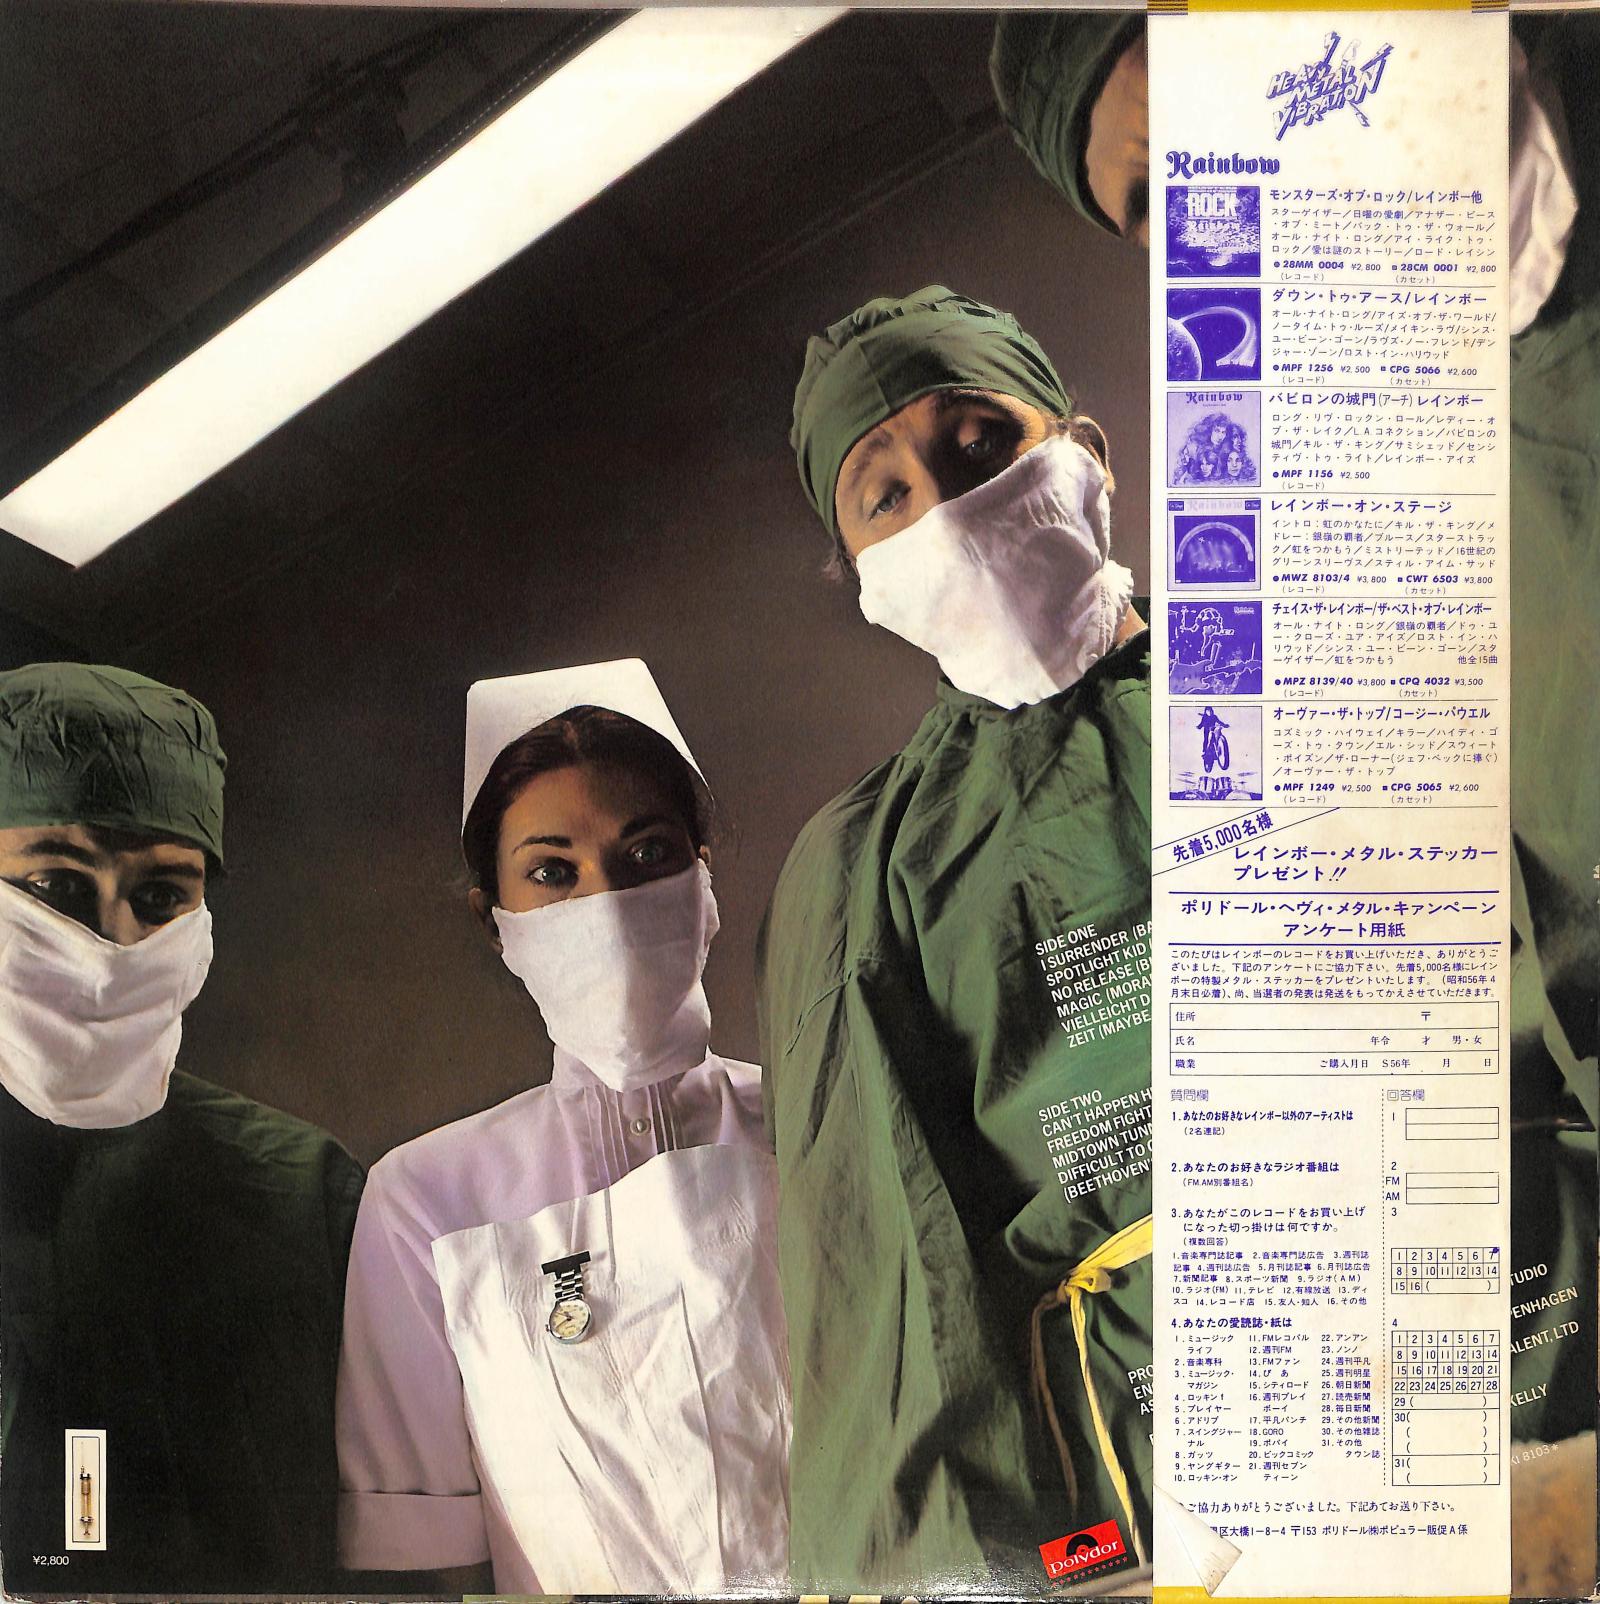 RAINBOW - Difficult To Cure